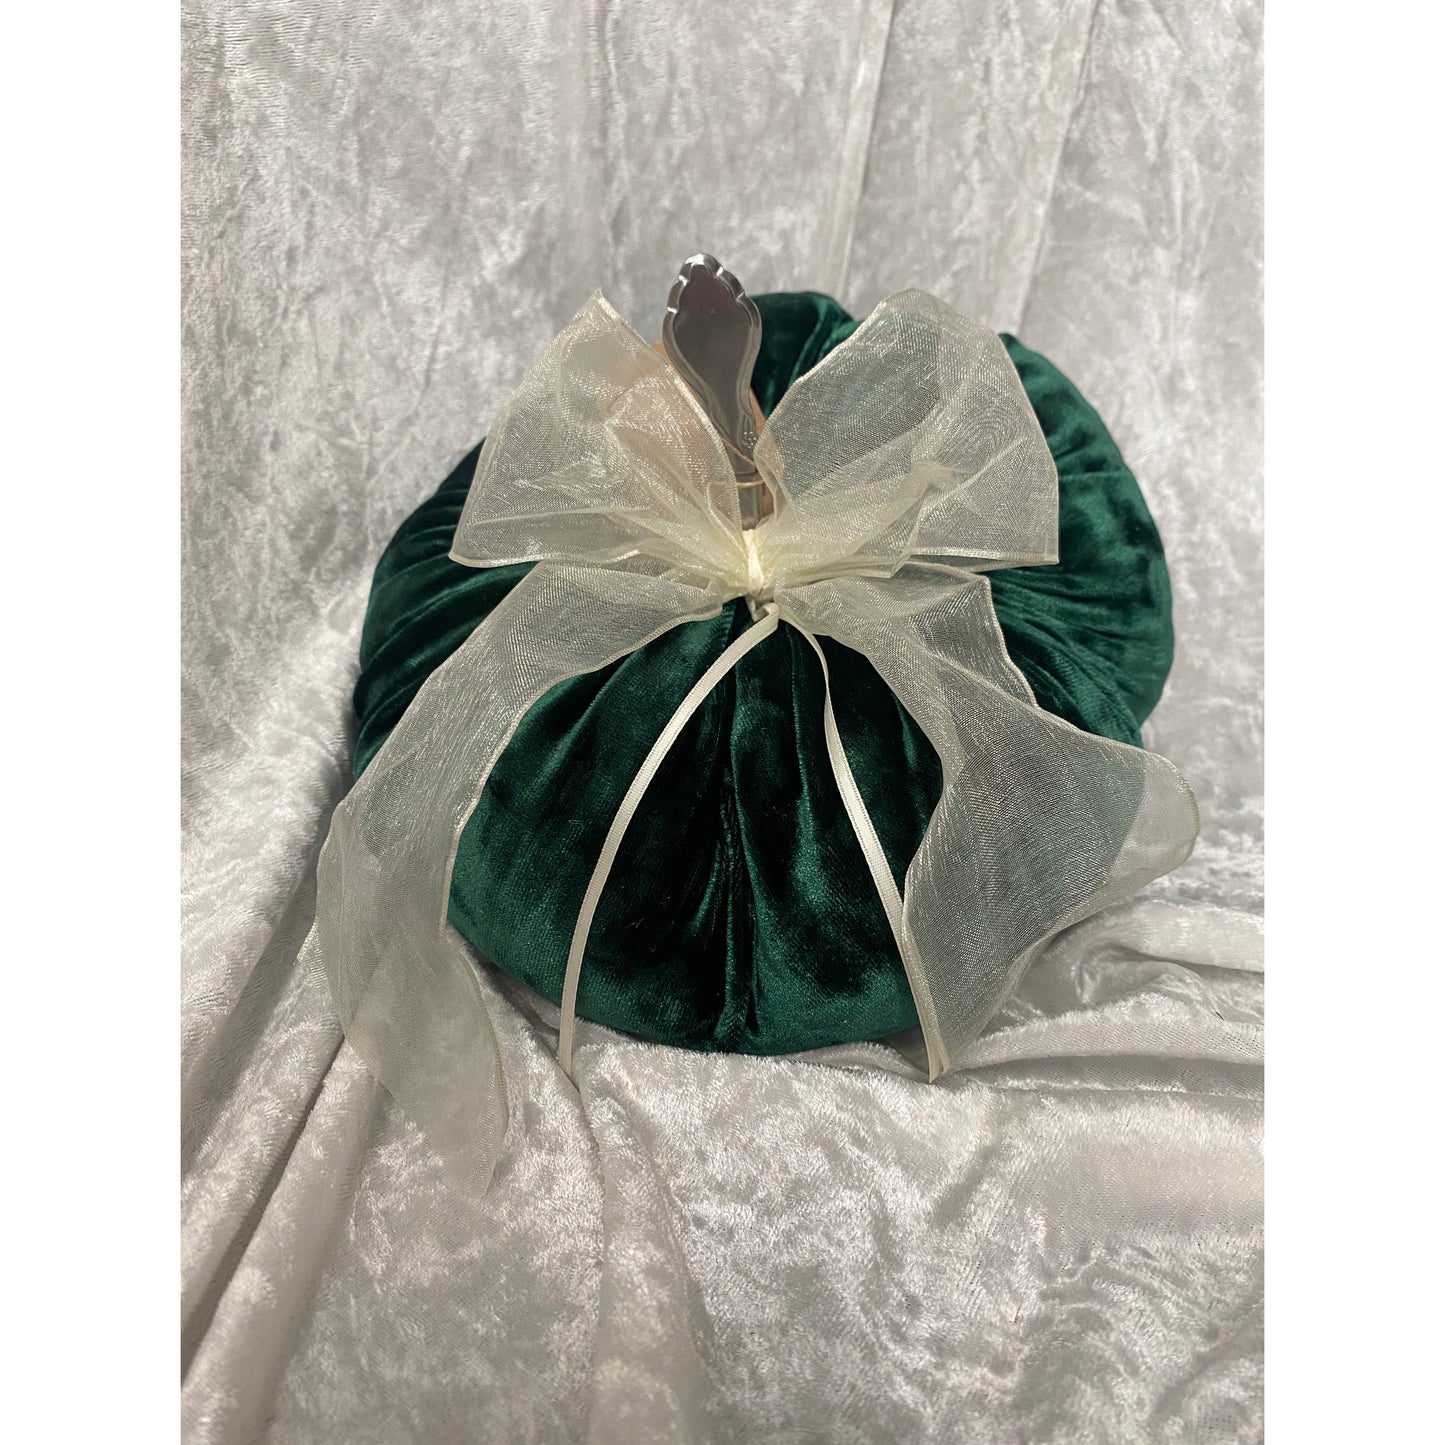 One of Kind Green Velvet Pumpkin with White Bow Large